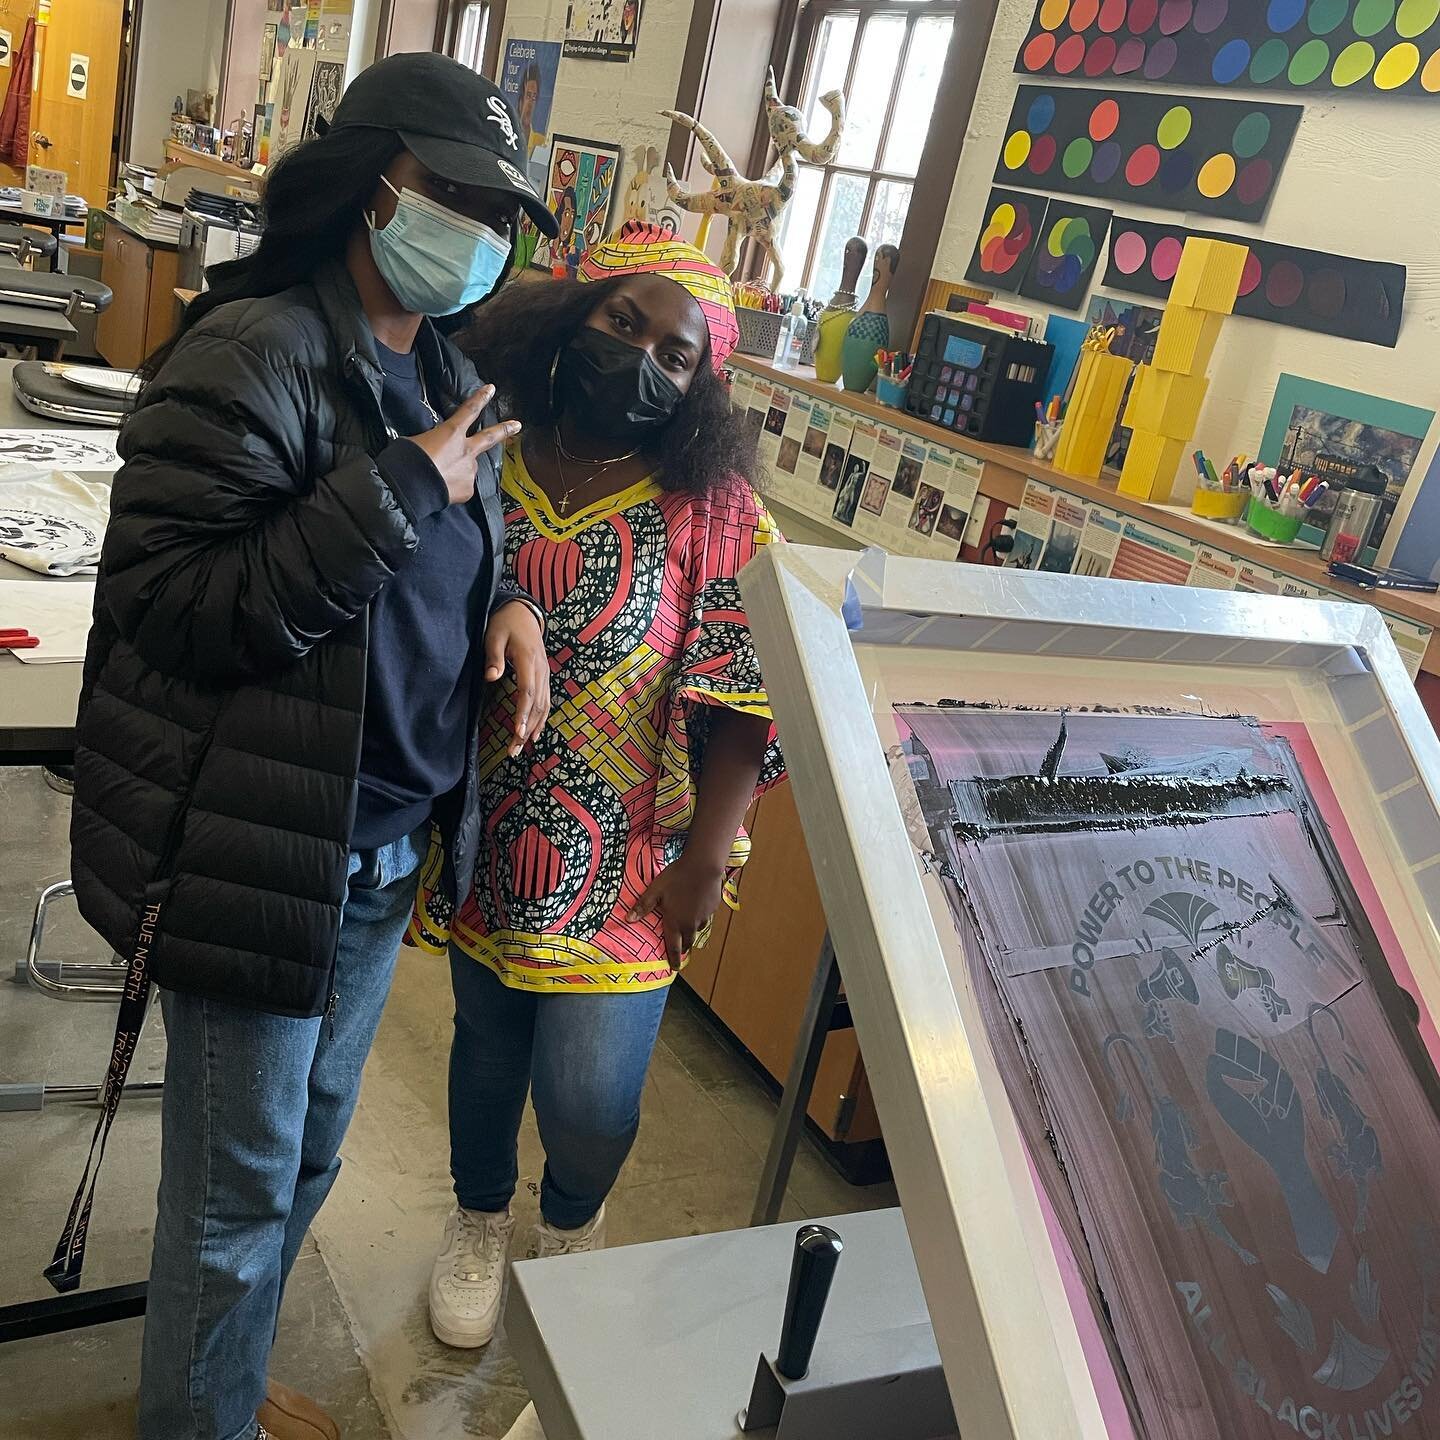 We are back to community printing! Have a club that needs merch or a dope shirt idea? We are here to help you in the process. Depending on the design we might be able to come to your school and do it for free. Just hit us up!

We also do workshops, c